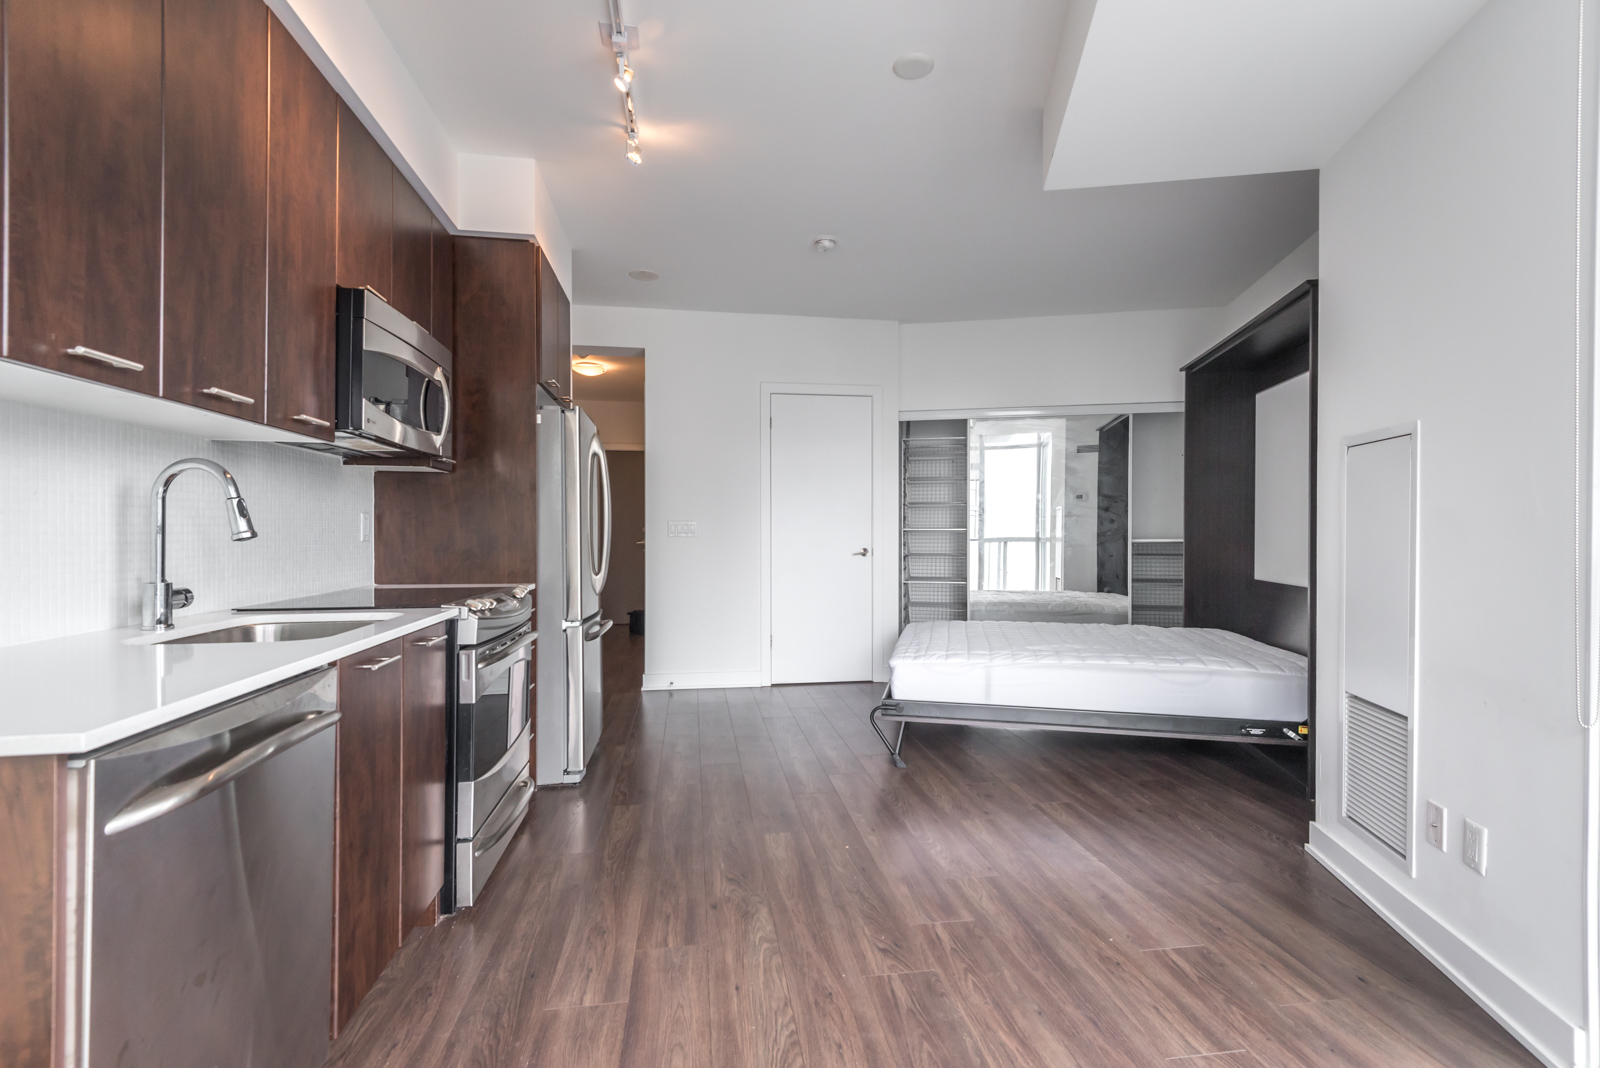 Image of condo showing kitchen, open bed, and also the brown floors.